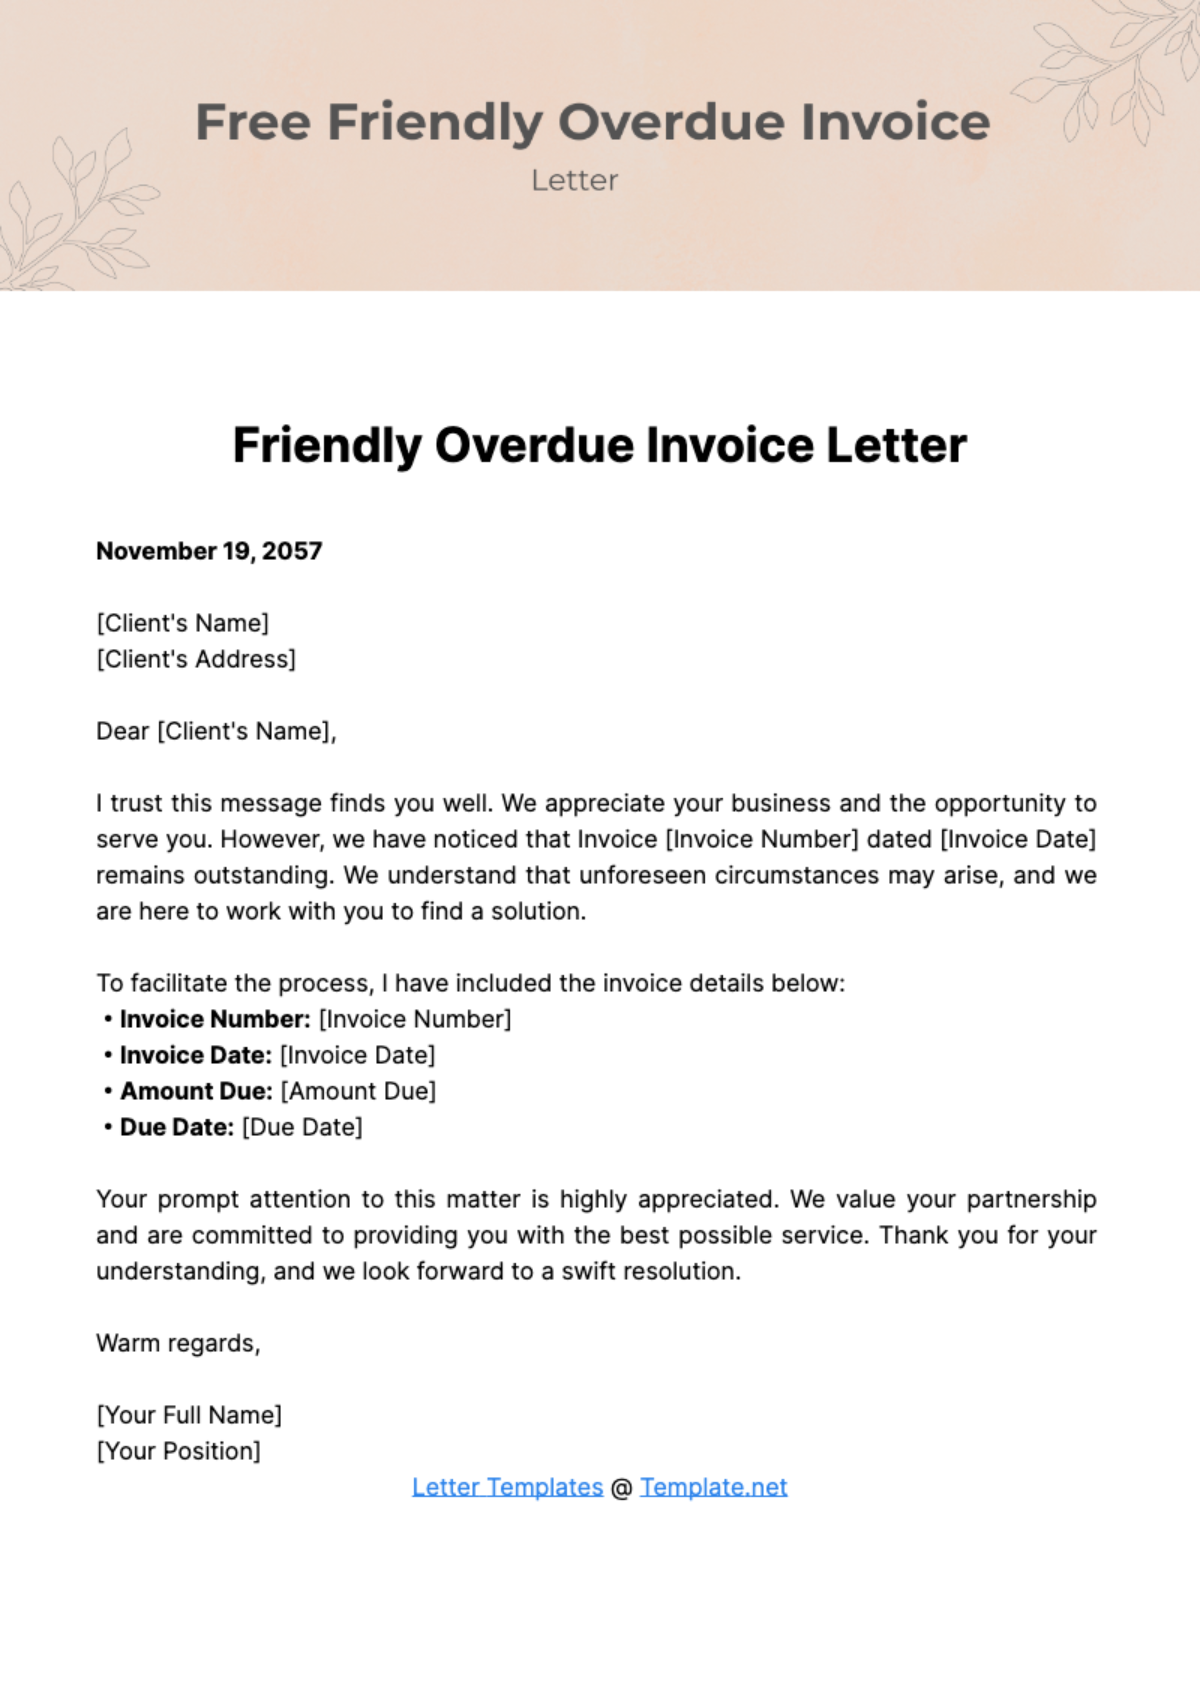 Friendly Overdue Invoice Letter Template